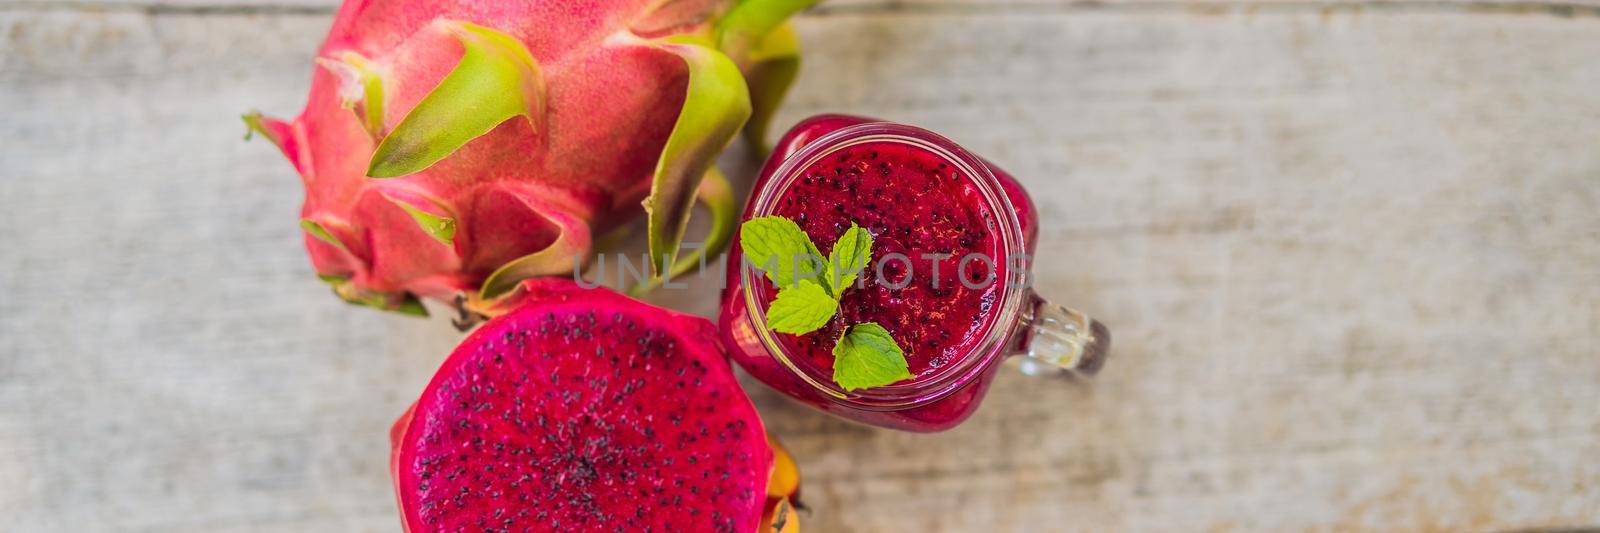 Dragon fruit smoothie on a wooden background. BANNER, LONG FORMAT